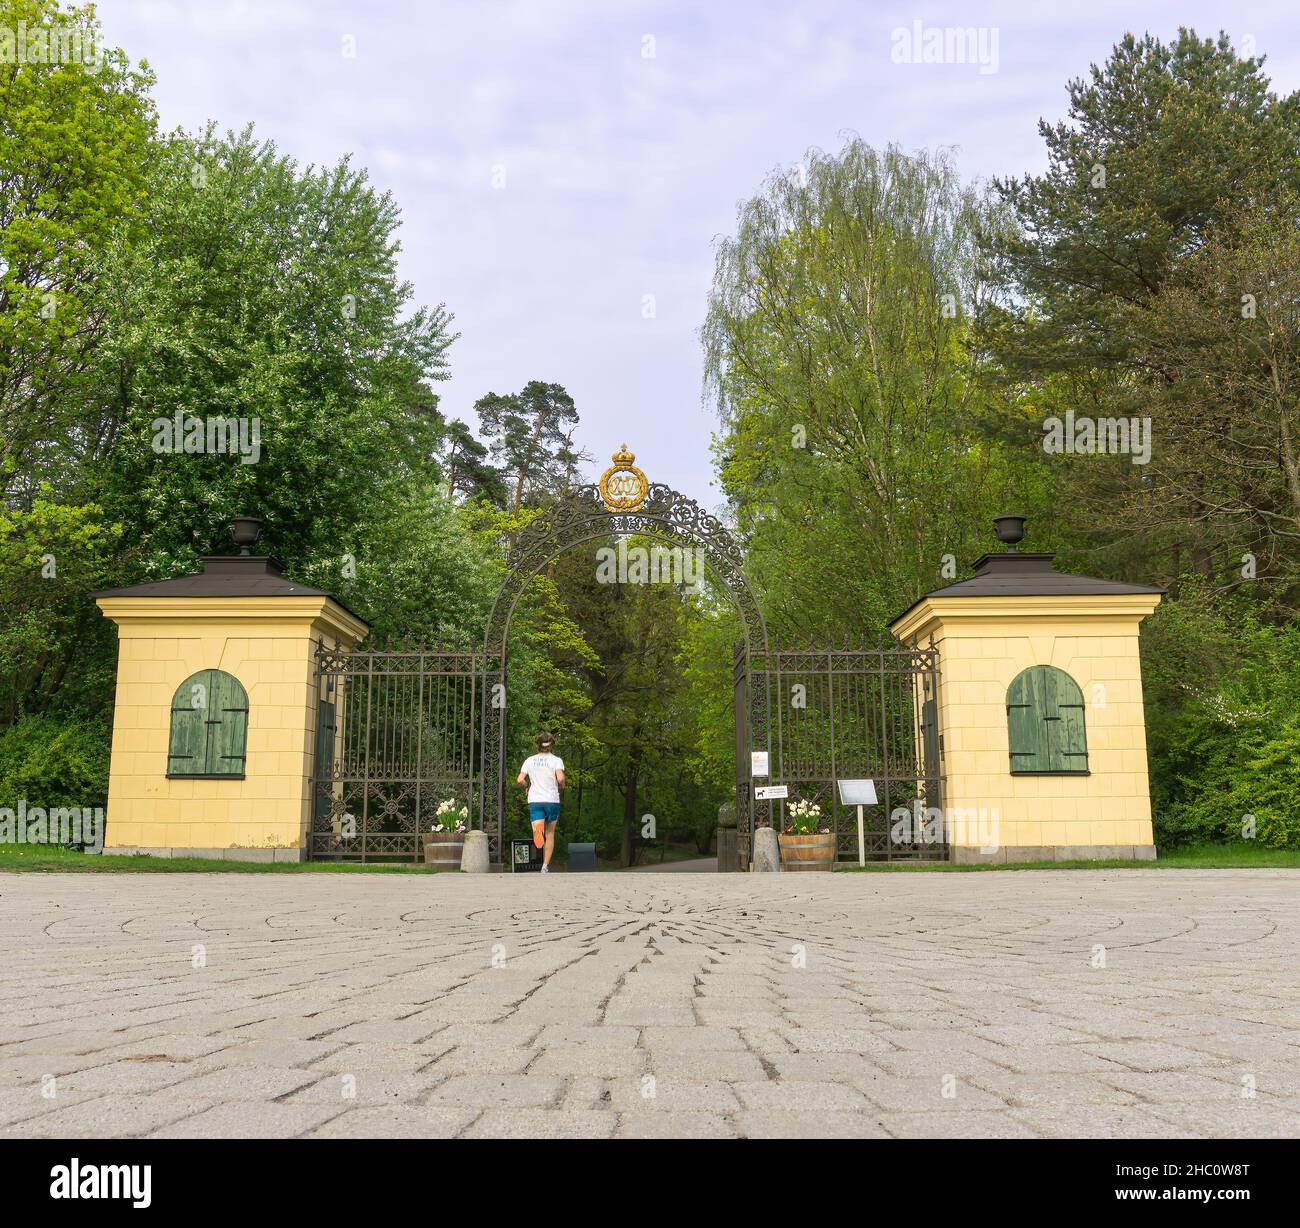 Stockholm, Sweden - May 13, 2021: Entrance to the park in Stockholm where royalties live, open for public Stock Photo